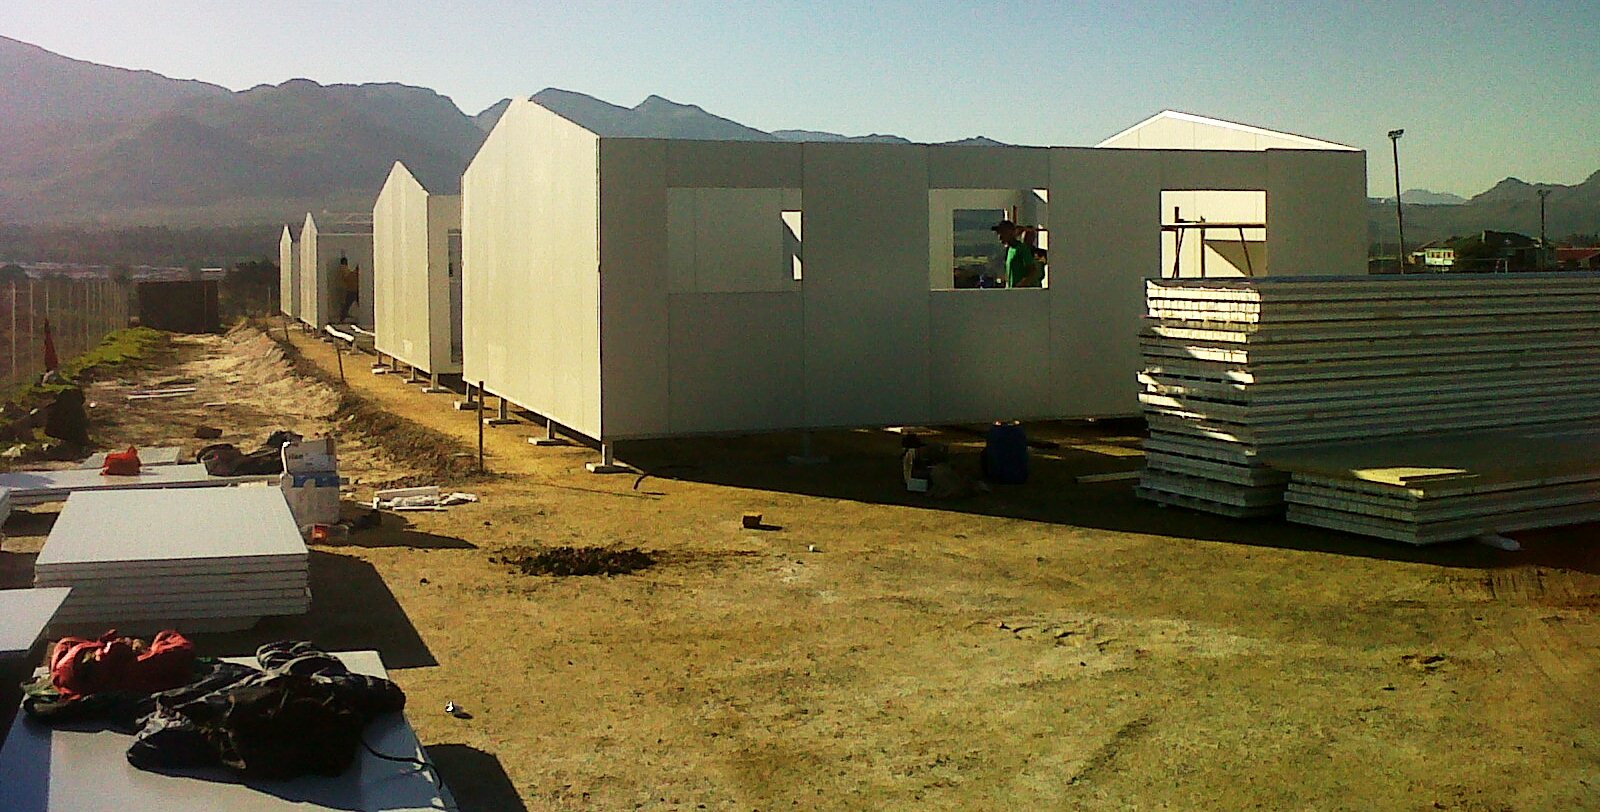 Temporary classrooms for Grabouw going up quickly and efficiently to be ready for next term